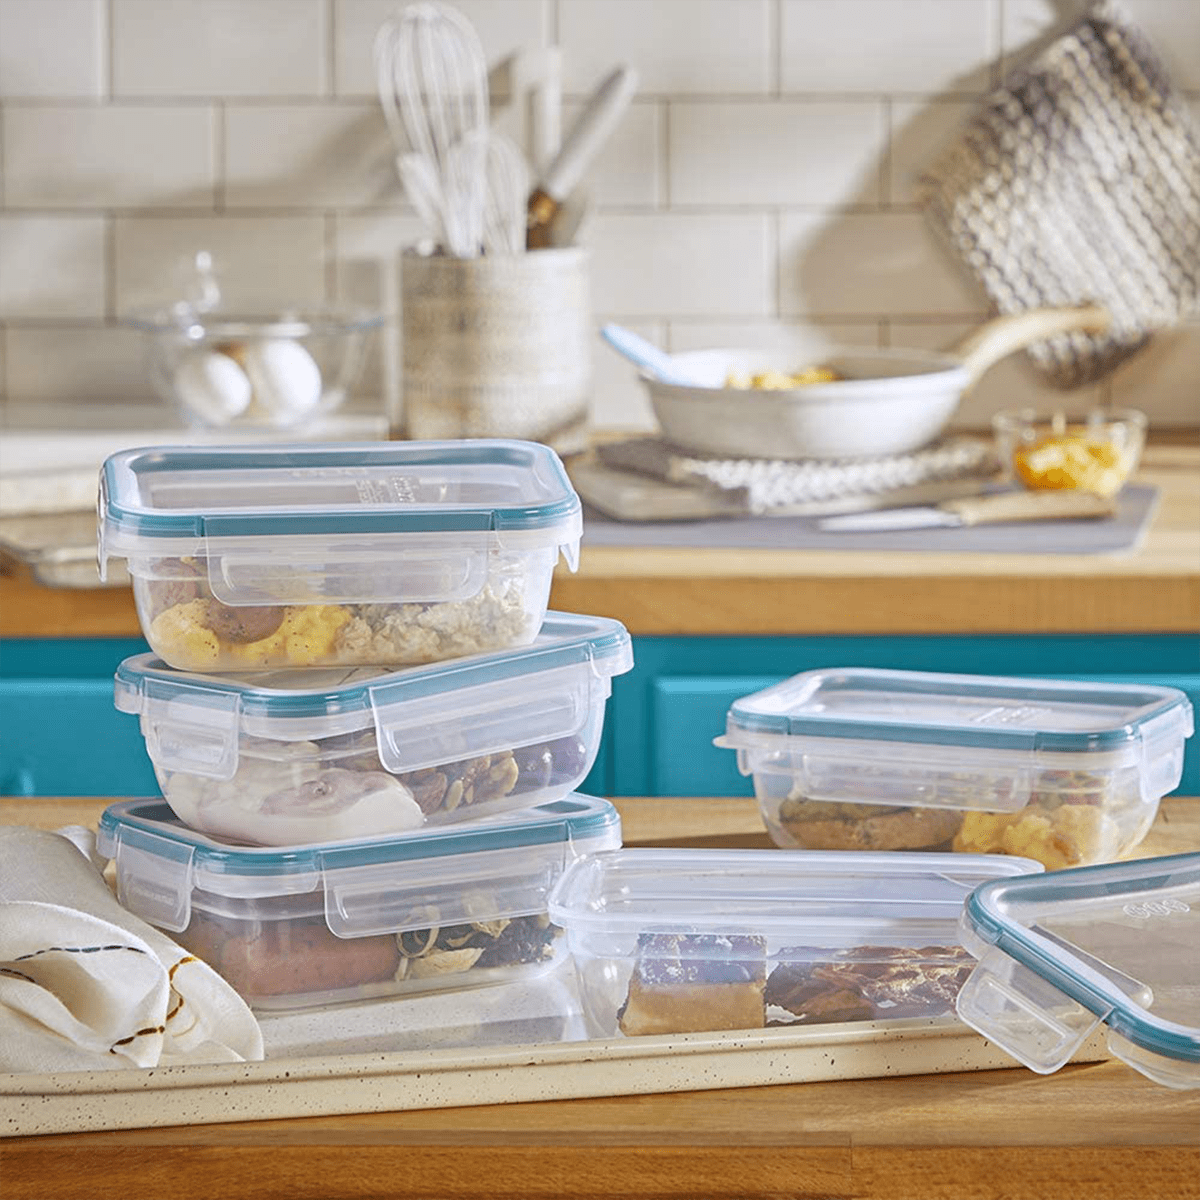 https://www.tasteofhome.com/wp-content/uploads/2022/07/the-very-best-food-storage-containers-ft-via-merchant.png